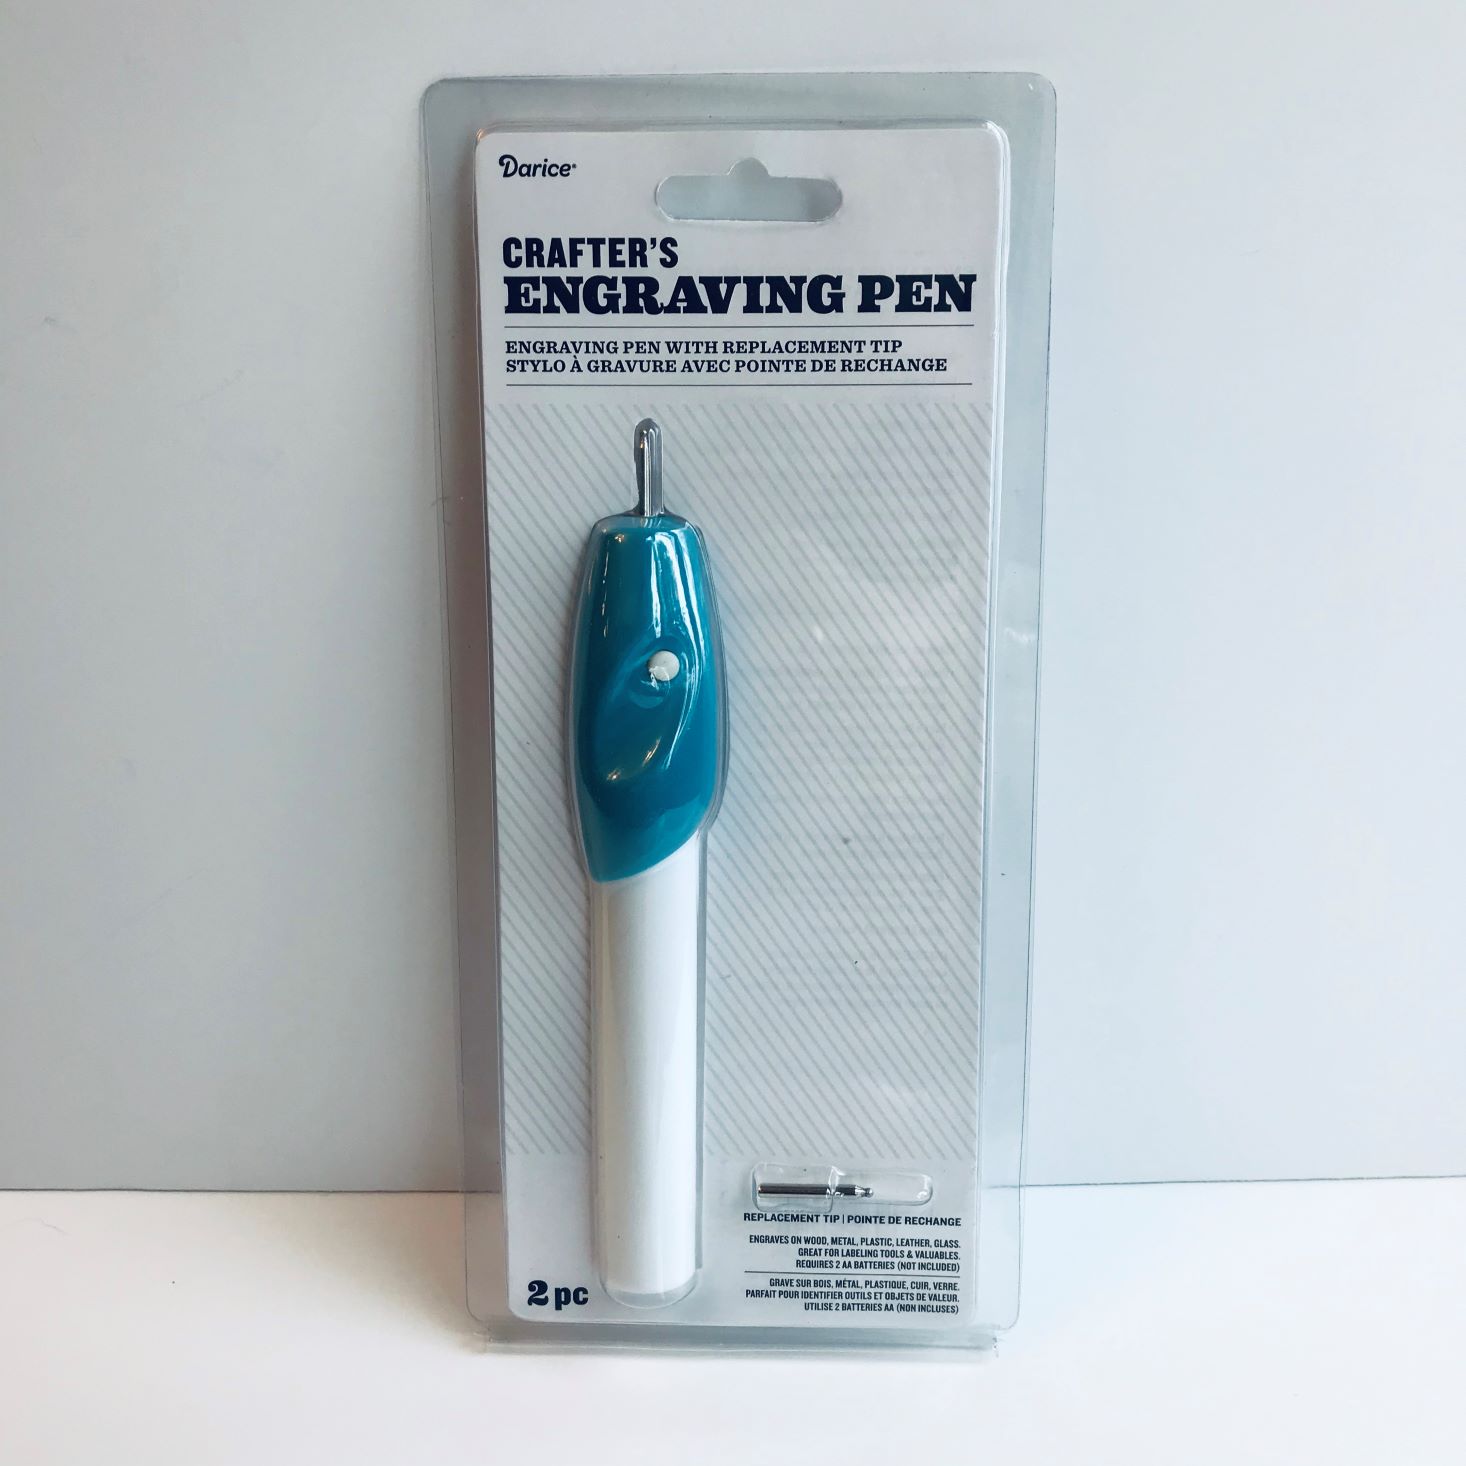 Adults and Crafts Nov 2019 engraving pen in box